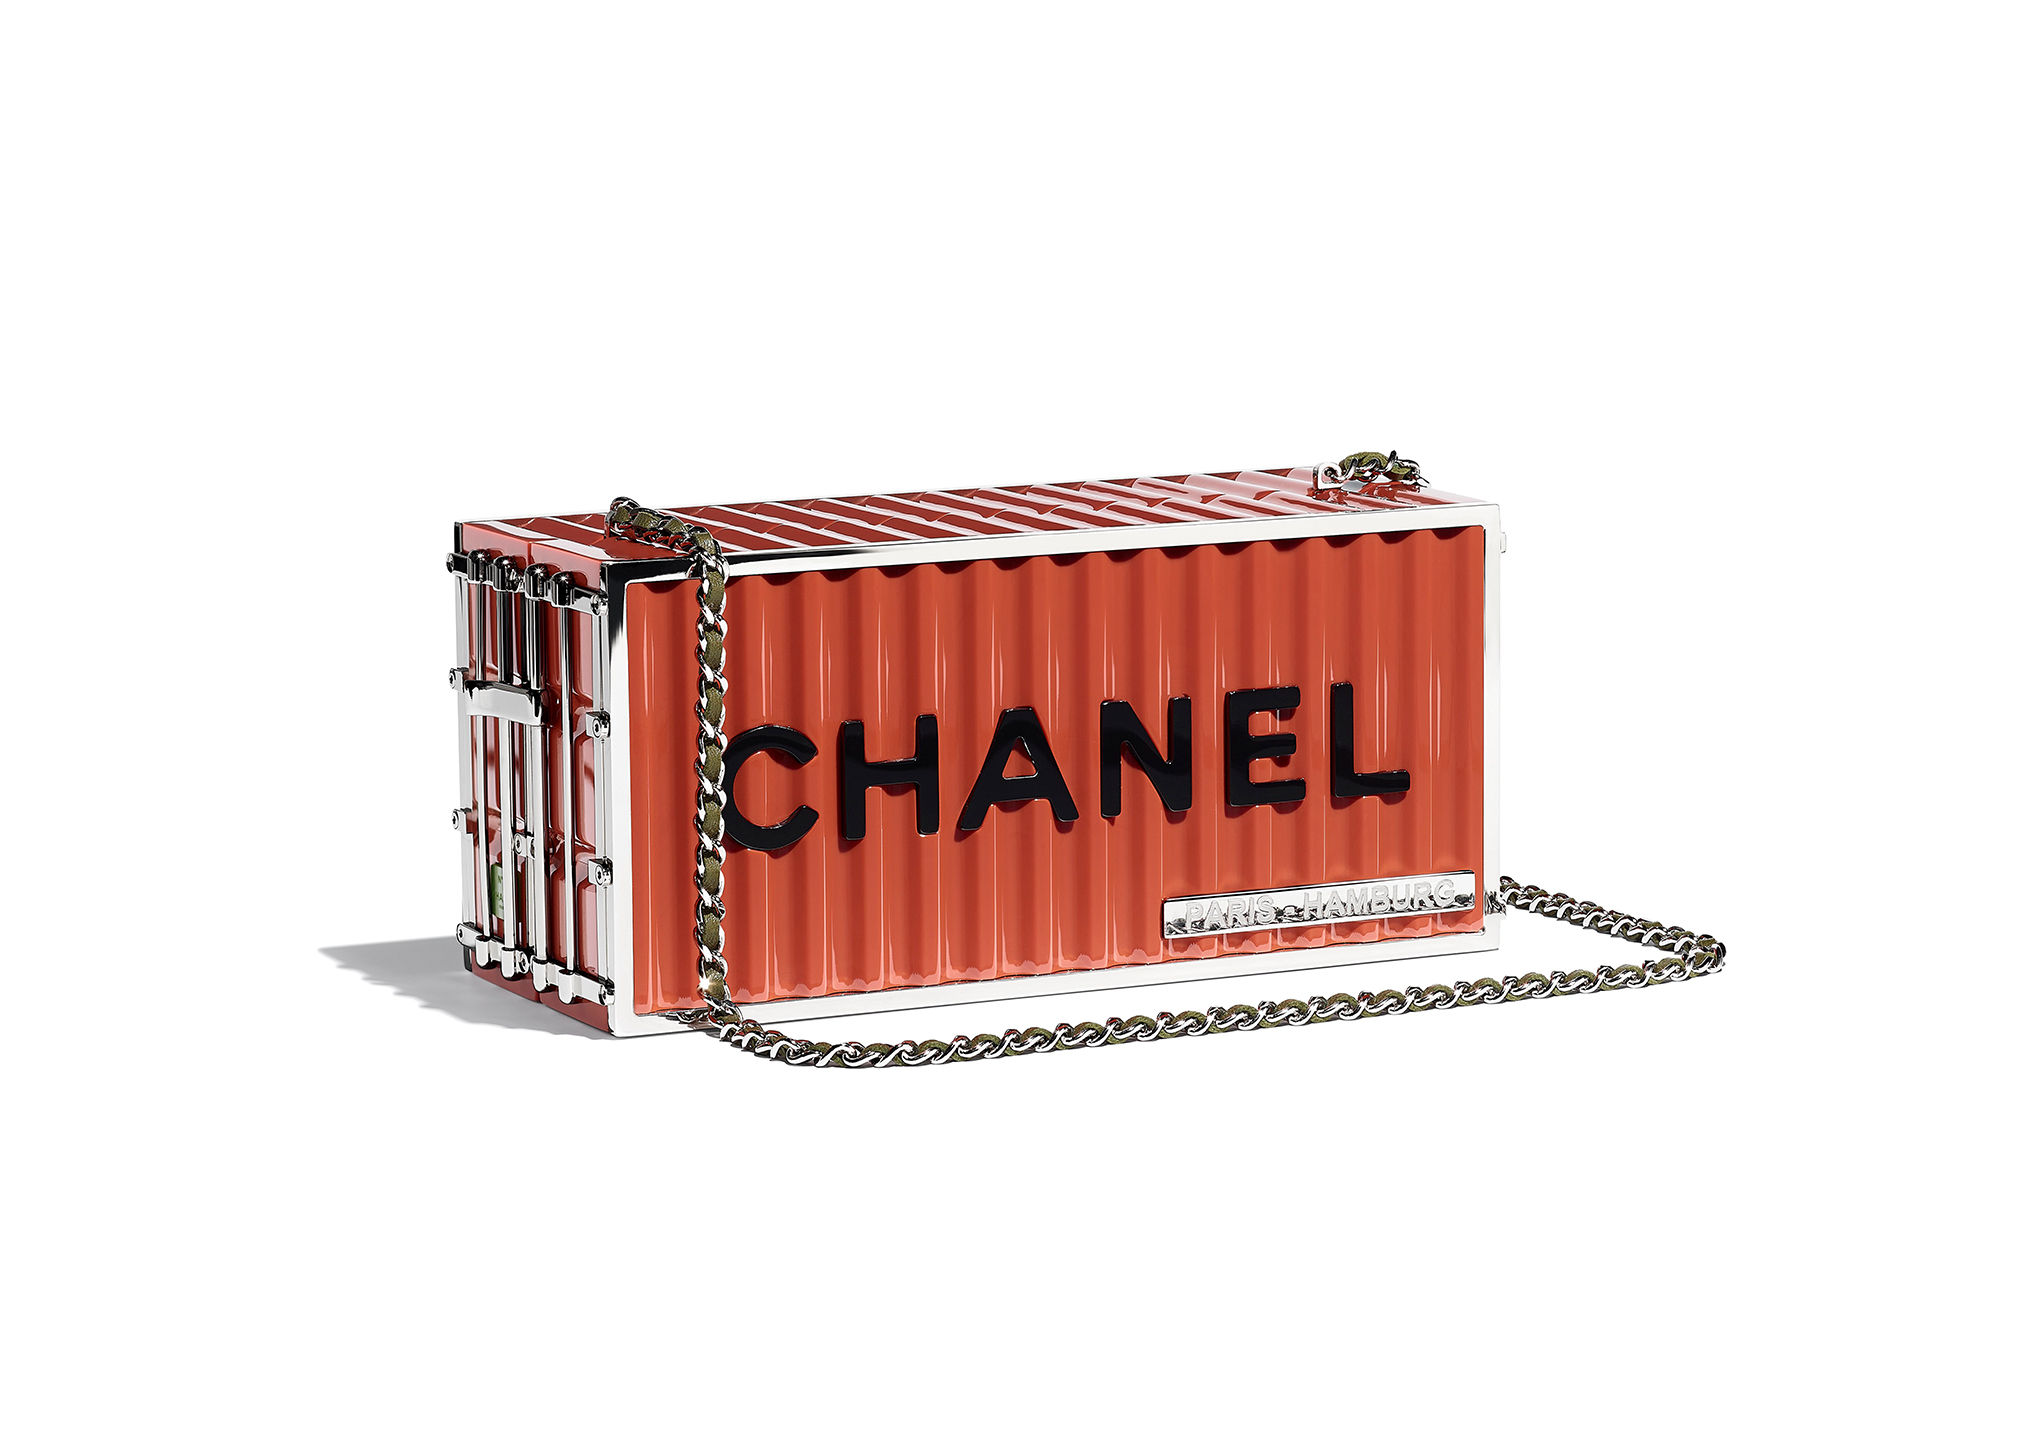 35 nautical, fantastical accessories from the new Chanel Métiers d